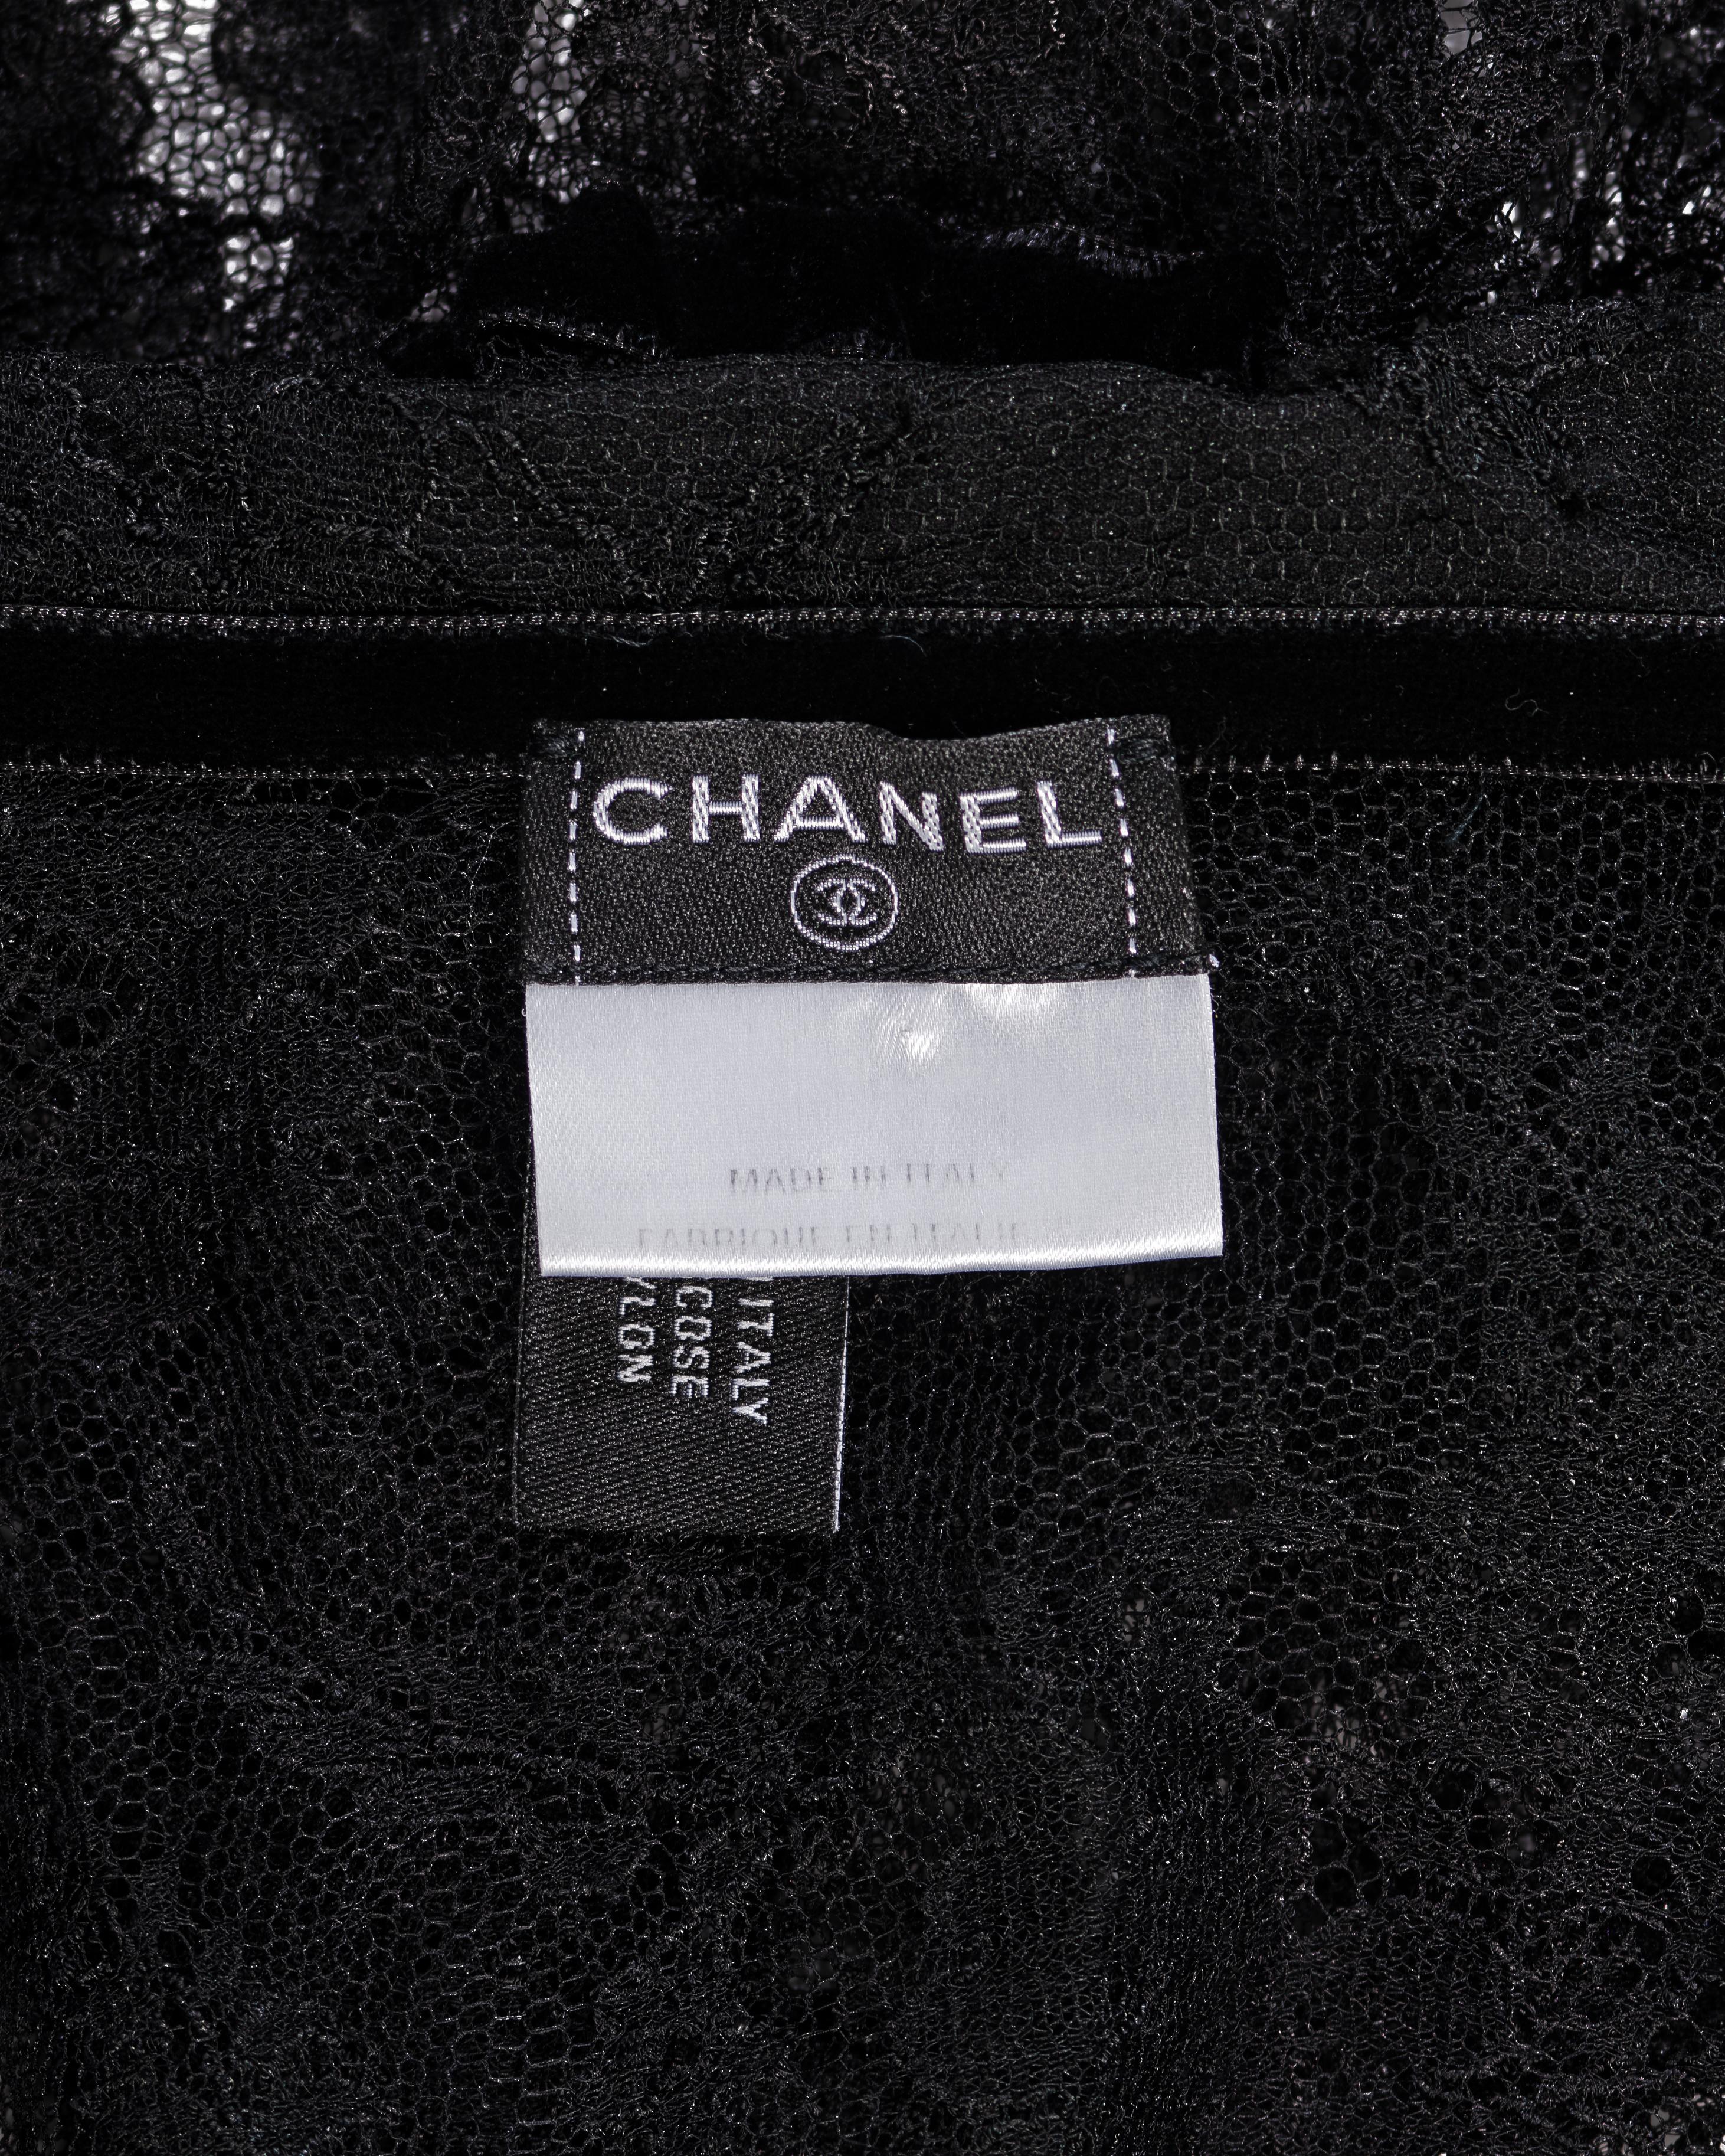 Chanel by Karl Lagerfeld Black Lace Blouse with Velvet Ribbon Trim, FW 2004 6